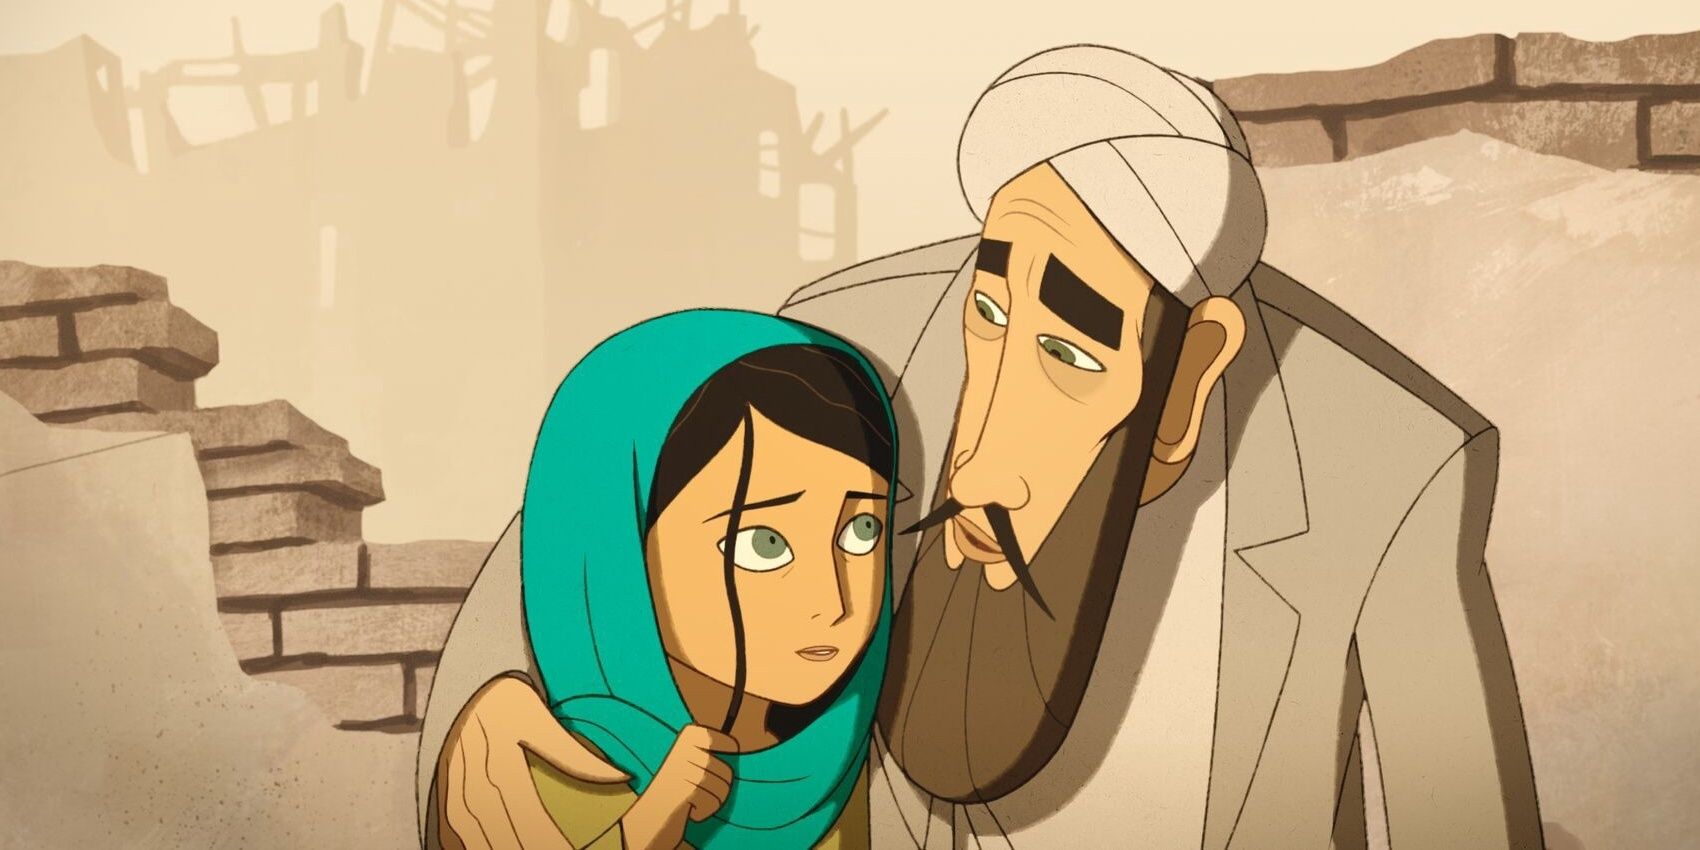 Parvana and her father walk together in The Breadwinner.